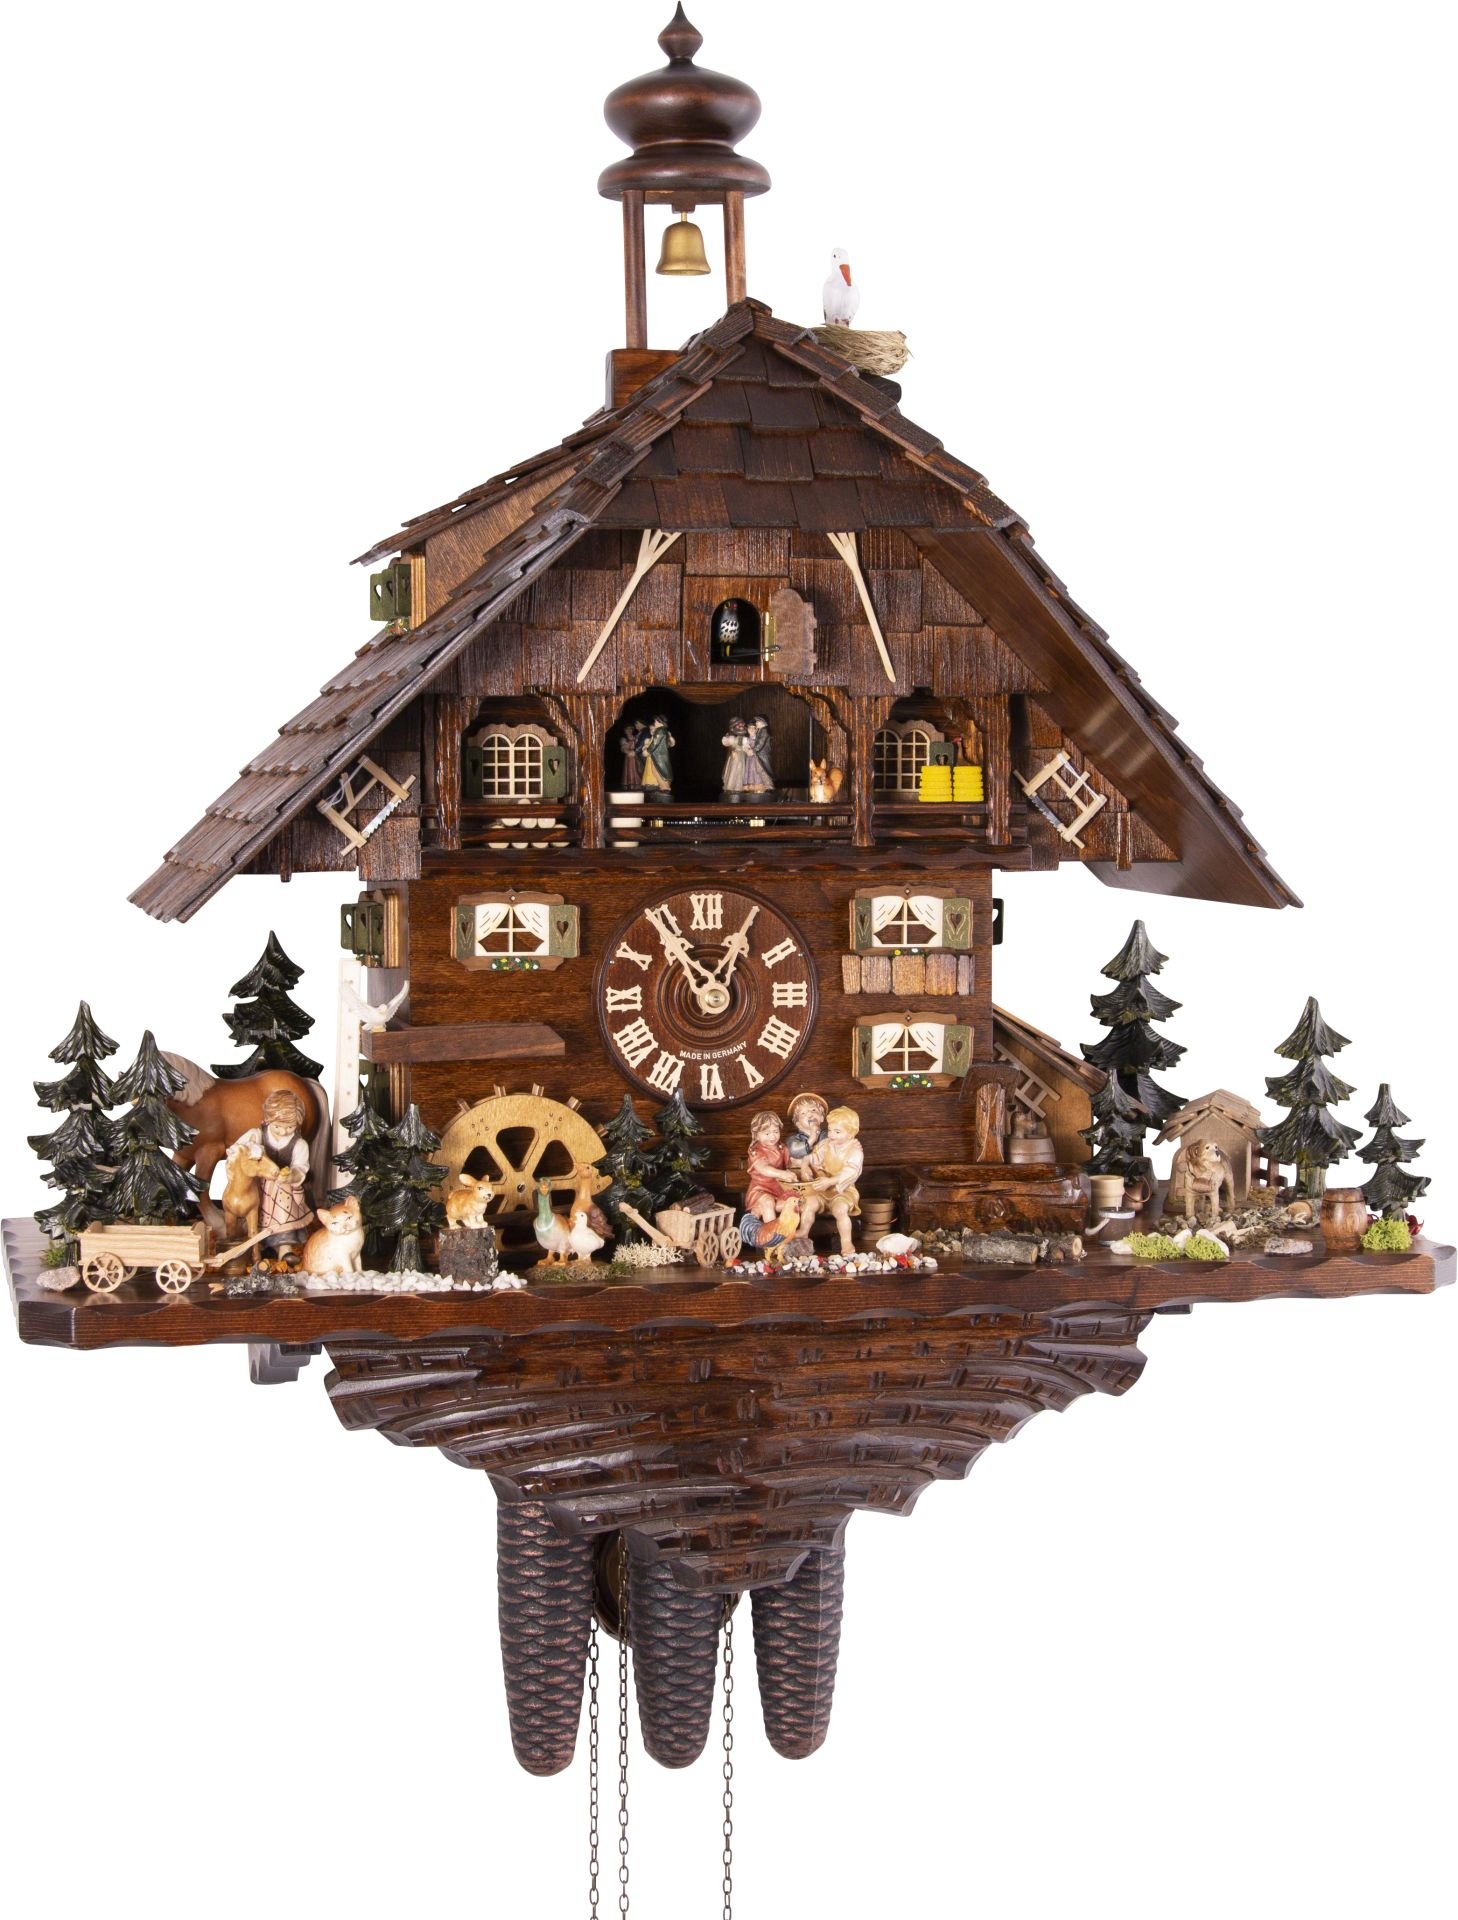 Cuckoo Clock Chalet Style 8 Day Movement 66cm by August Schwer